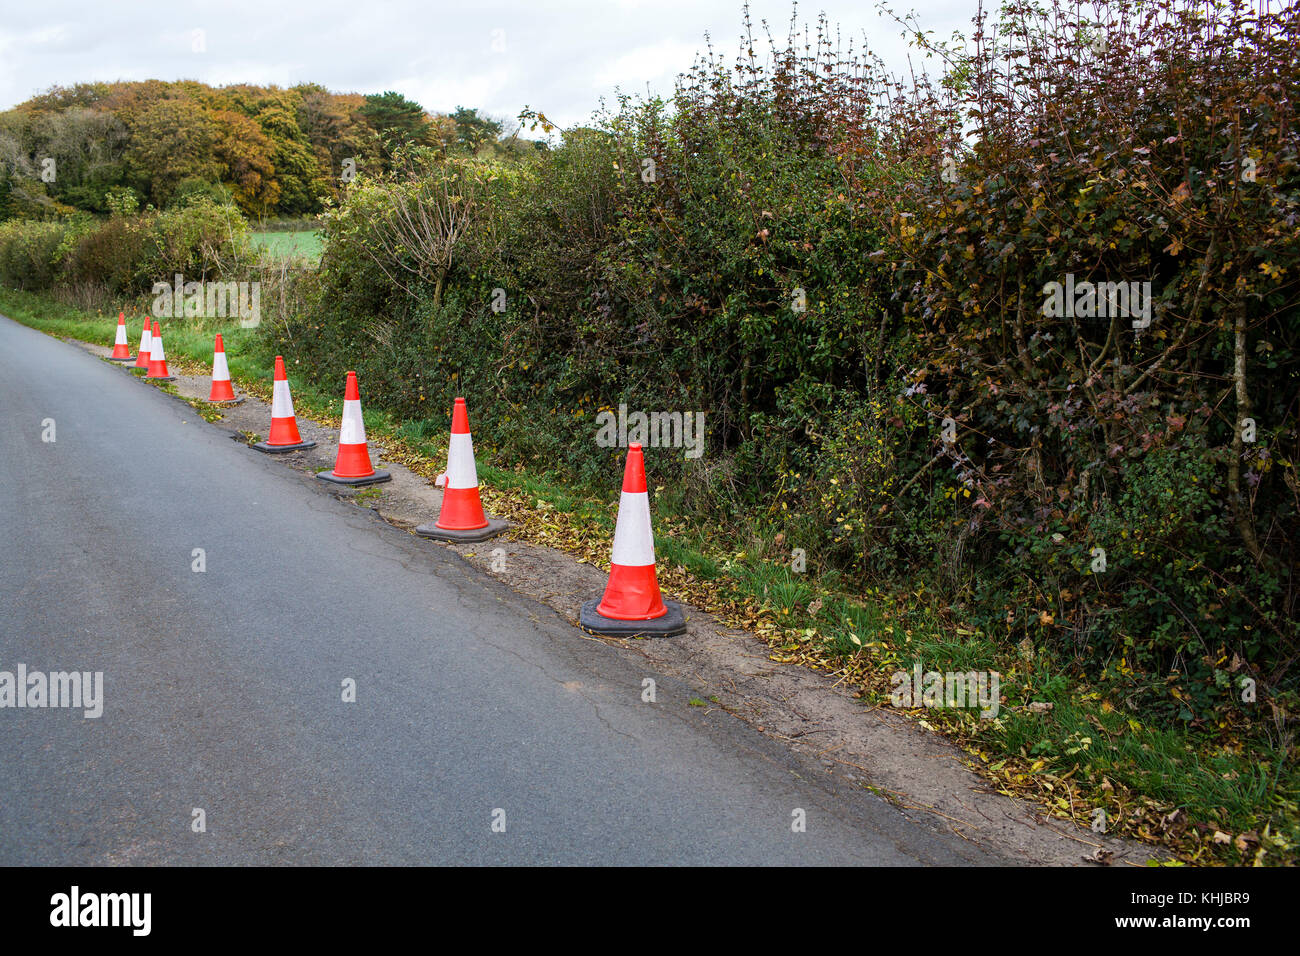 A line of cones on a country lane marking out the edge of the road and the grass verge. Stock Photo